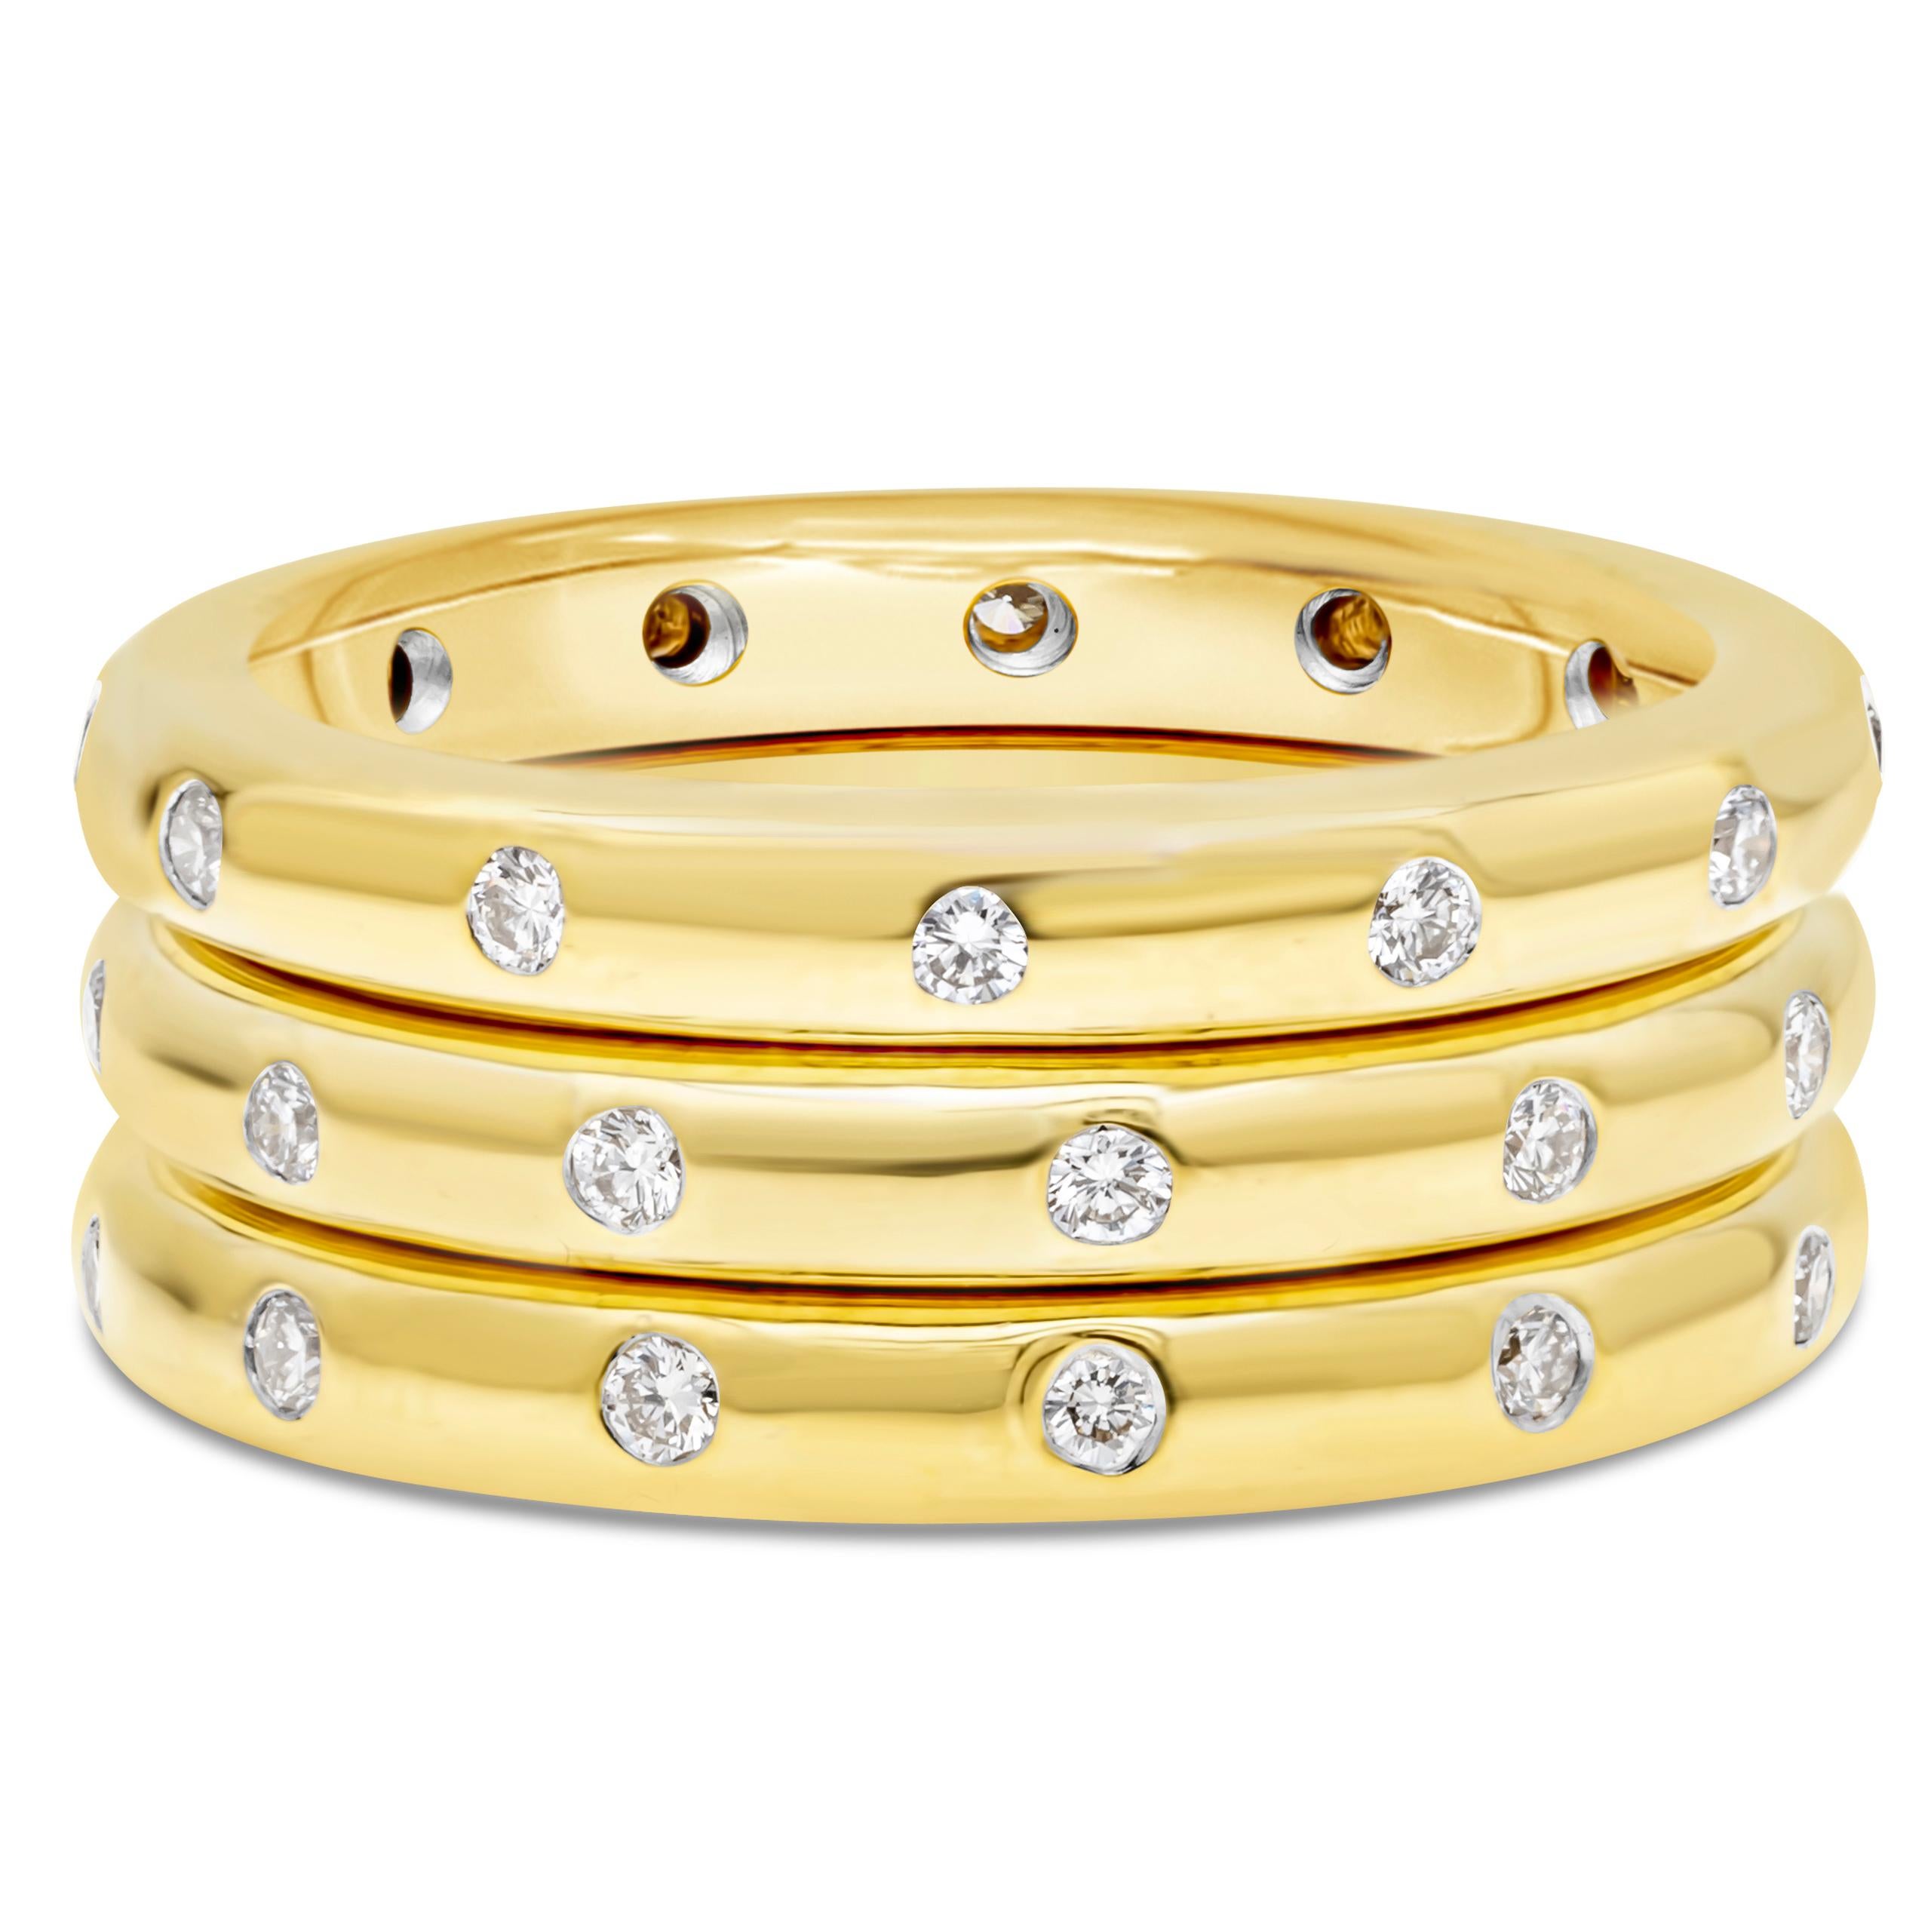 A fashionable three stackable rings showcasing 0.58 carats total of round brilliant diamonds, flush-set and spaced evenly in a rounded 18K Yellow Gold mounting. F color and VS in clarity, size 6.5 US. Perfect for everyday use. 

Roman Malakov is a